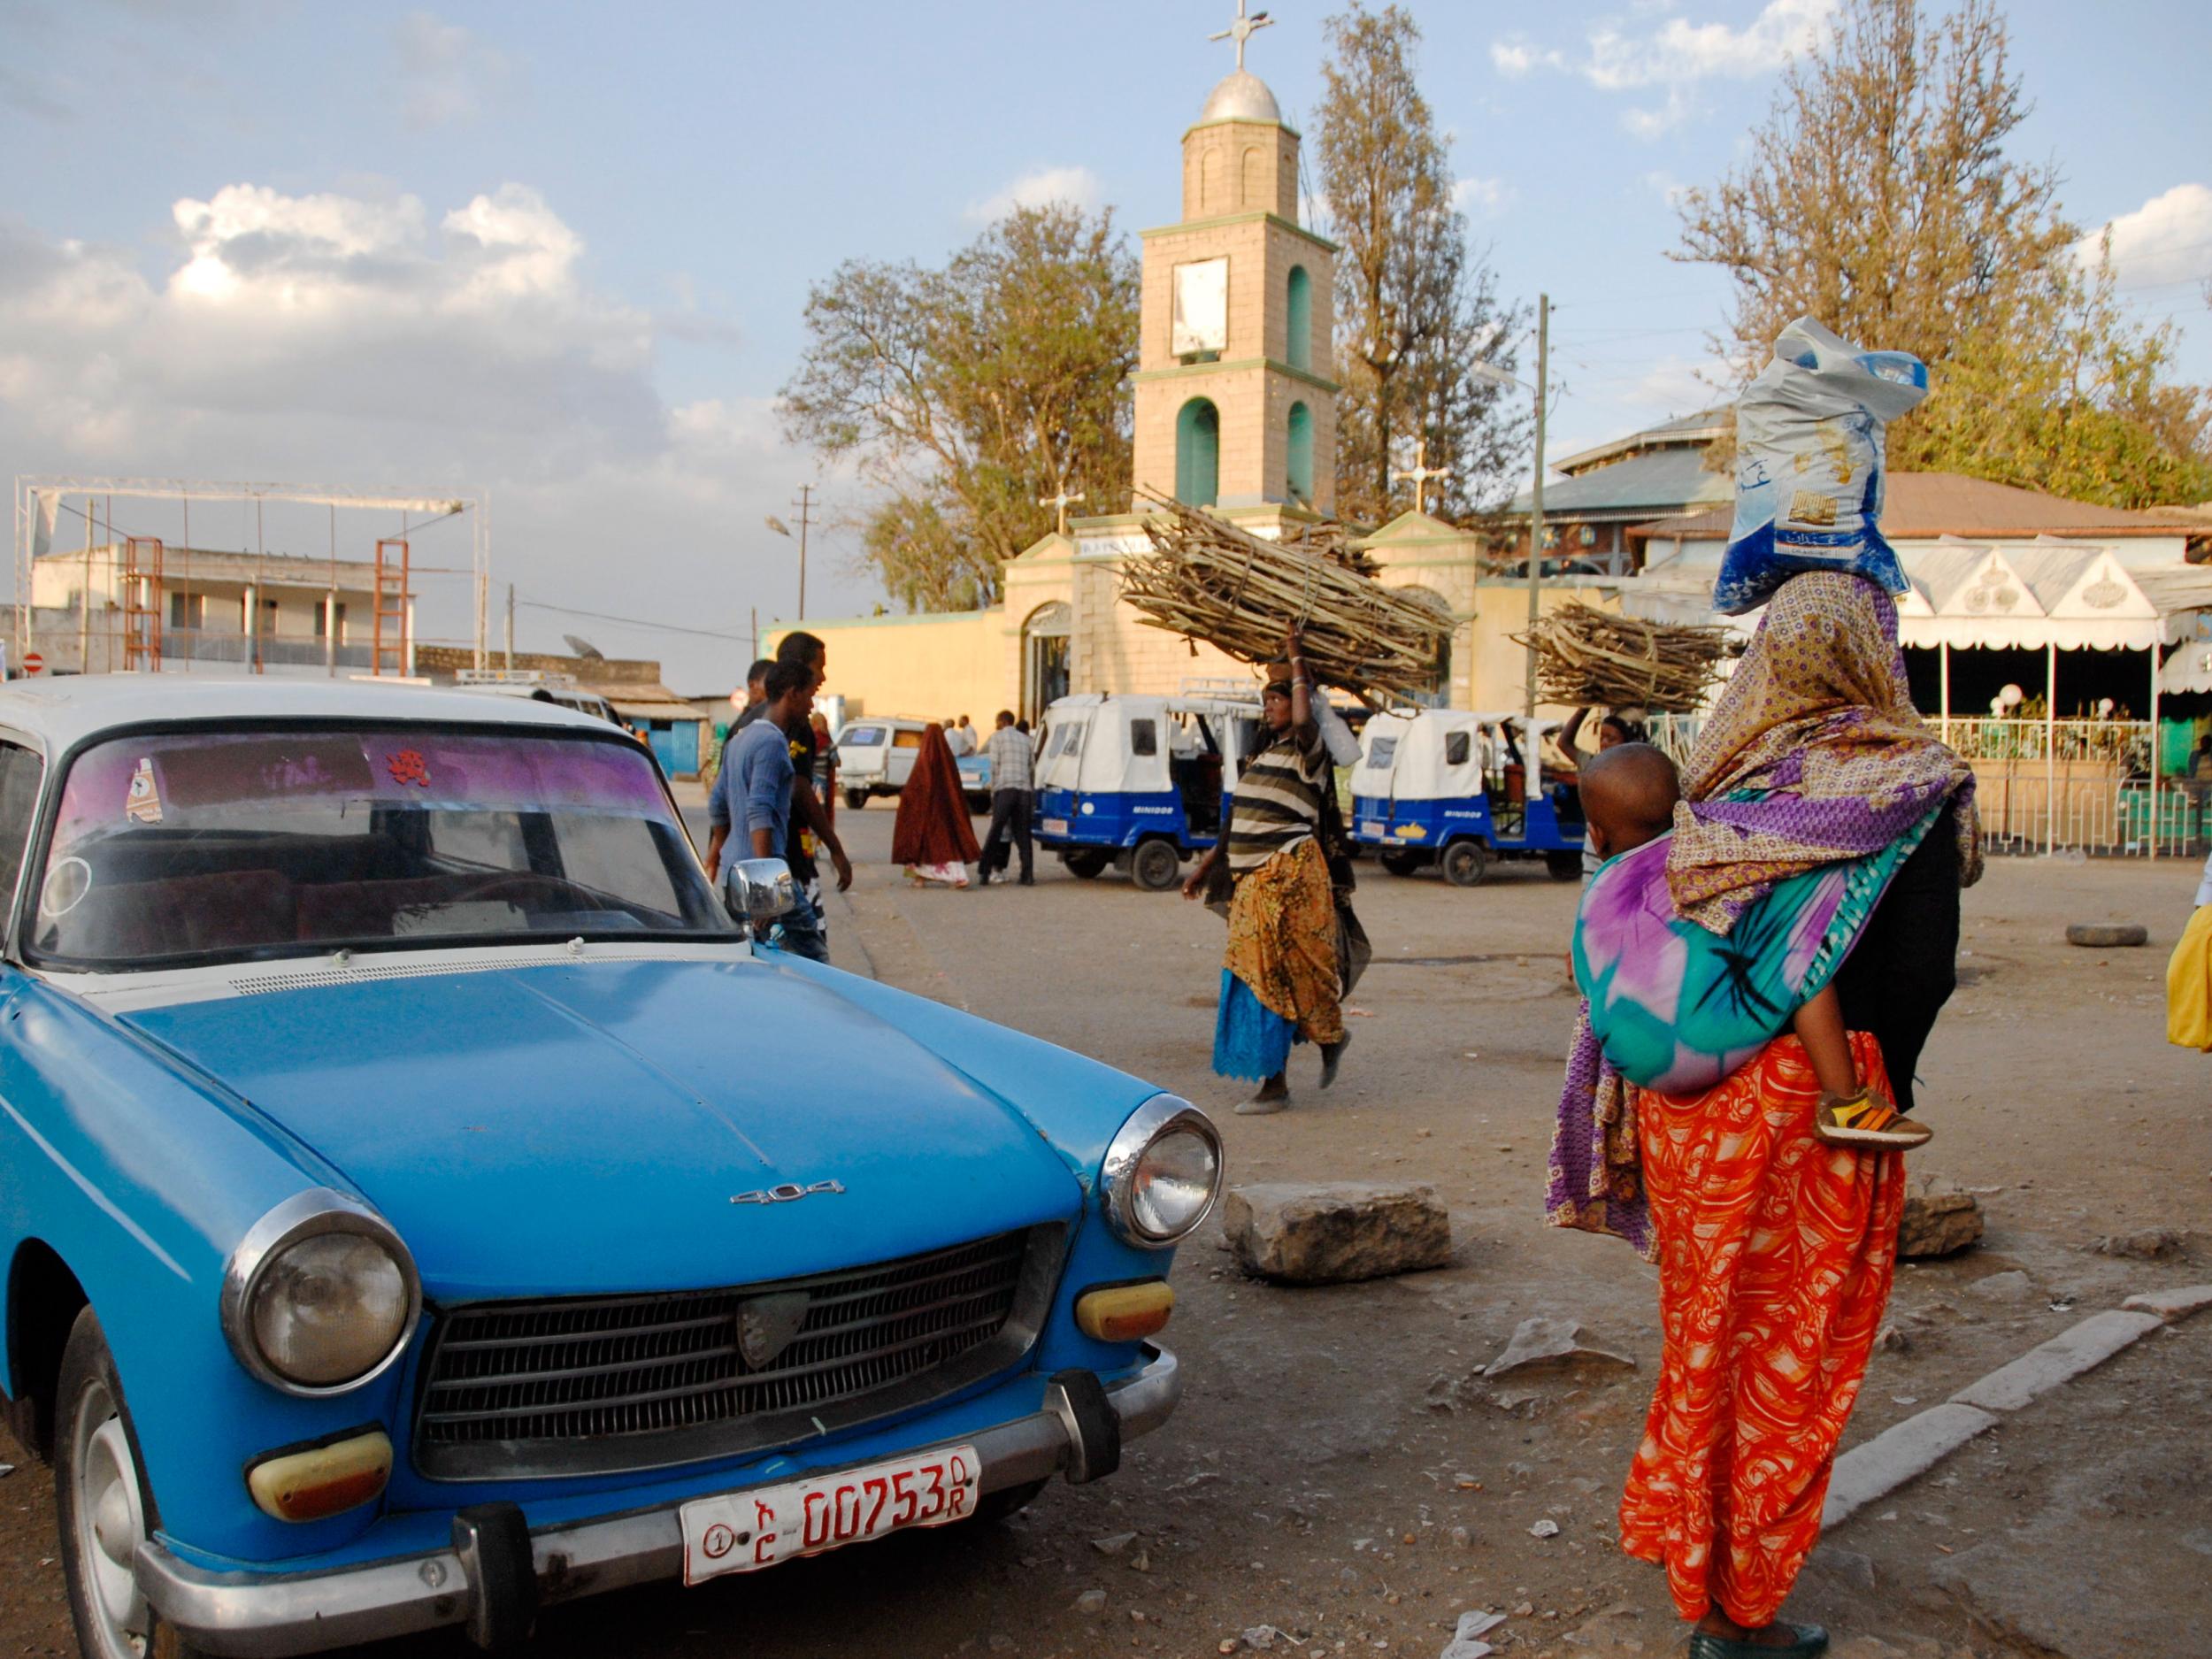 People pass across city square in Harar, Ethiopia